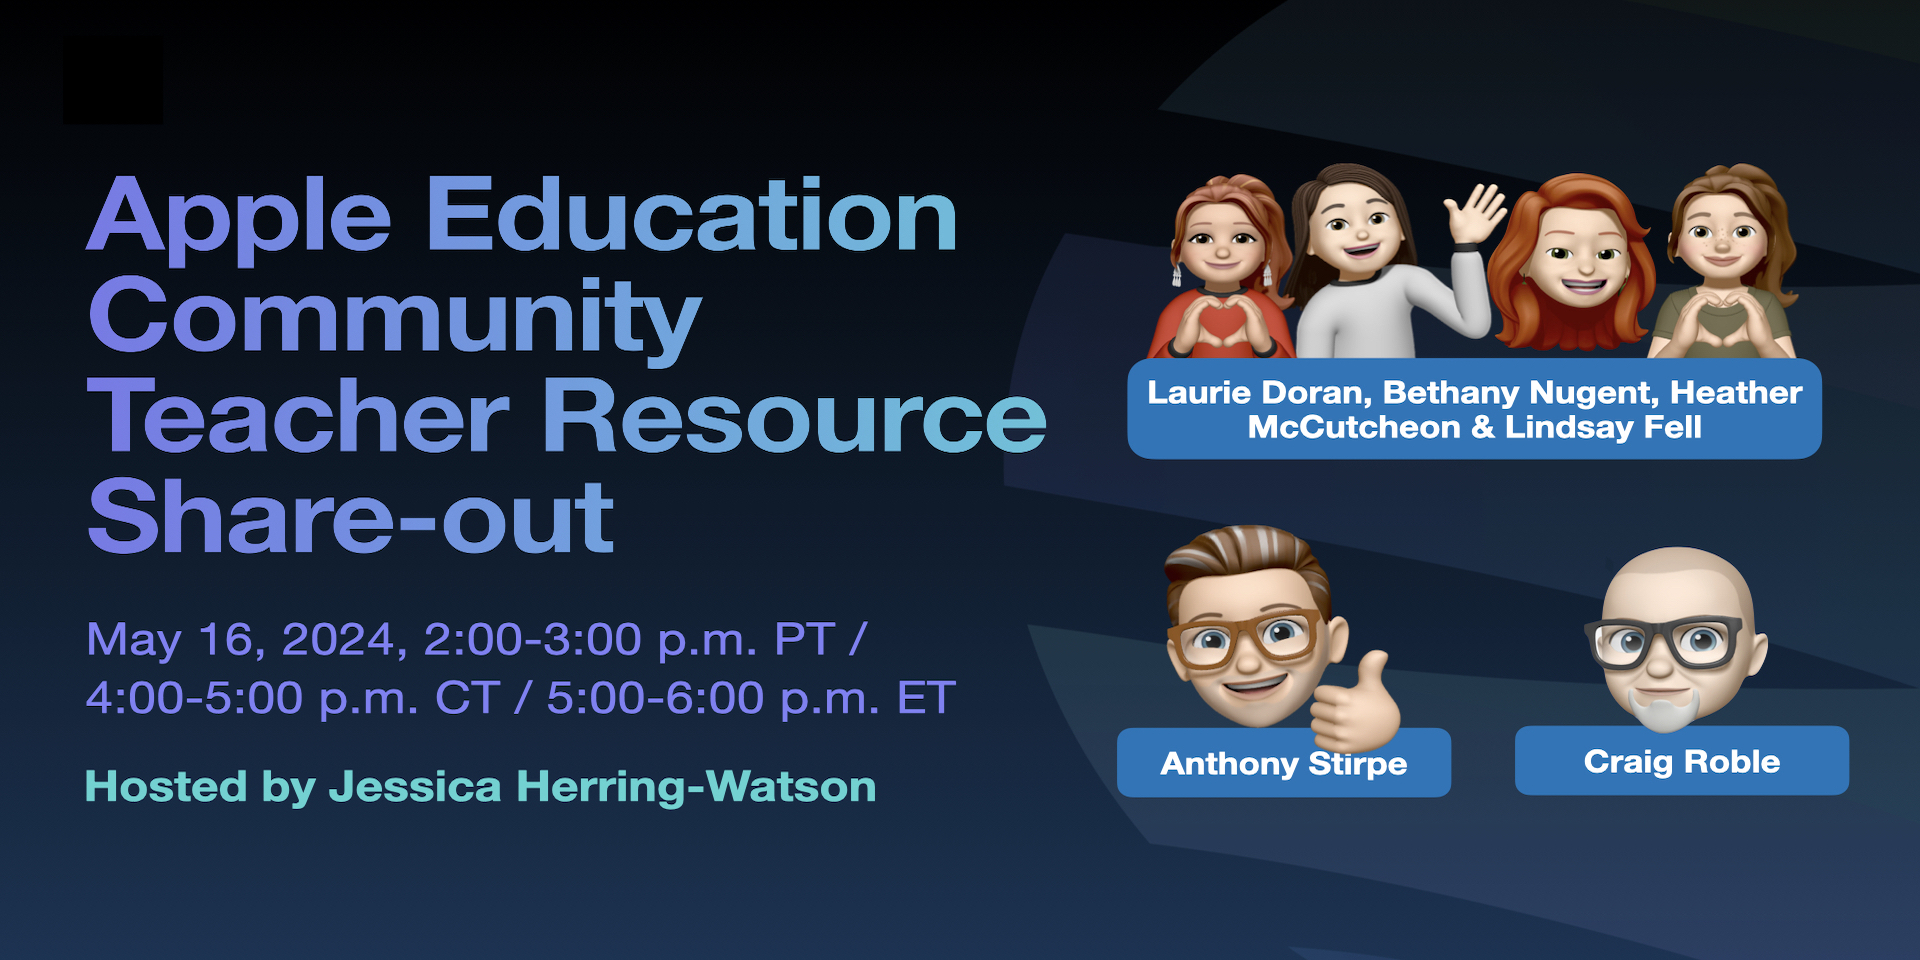 poster for Apple Education Community Teacher Resource Share-out on May 16, 2024; include time, date, and presenters' Memojis